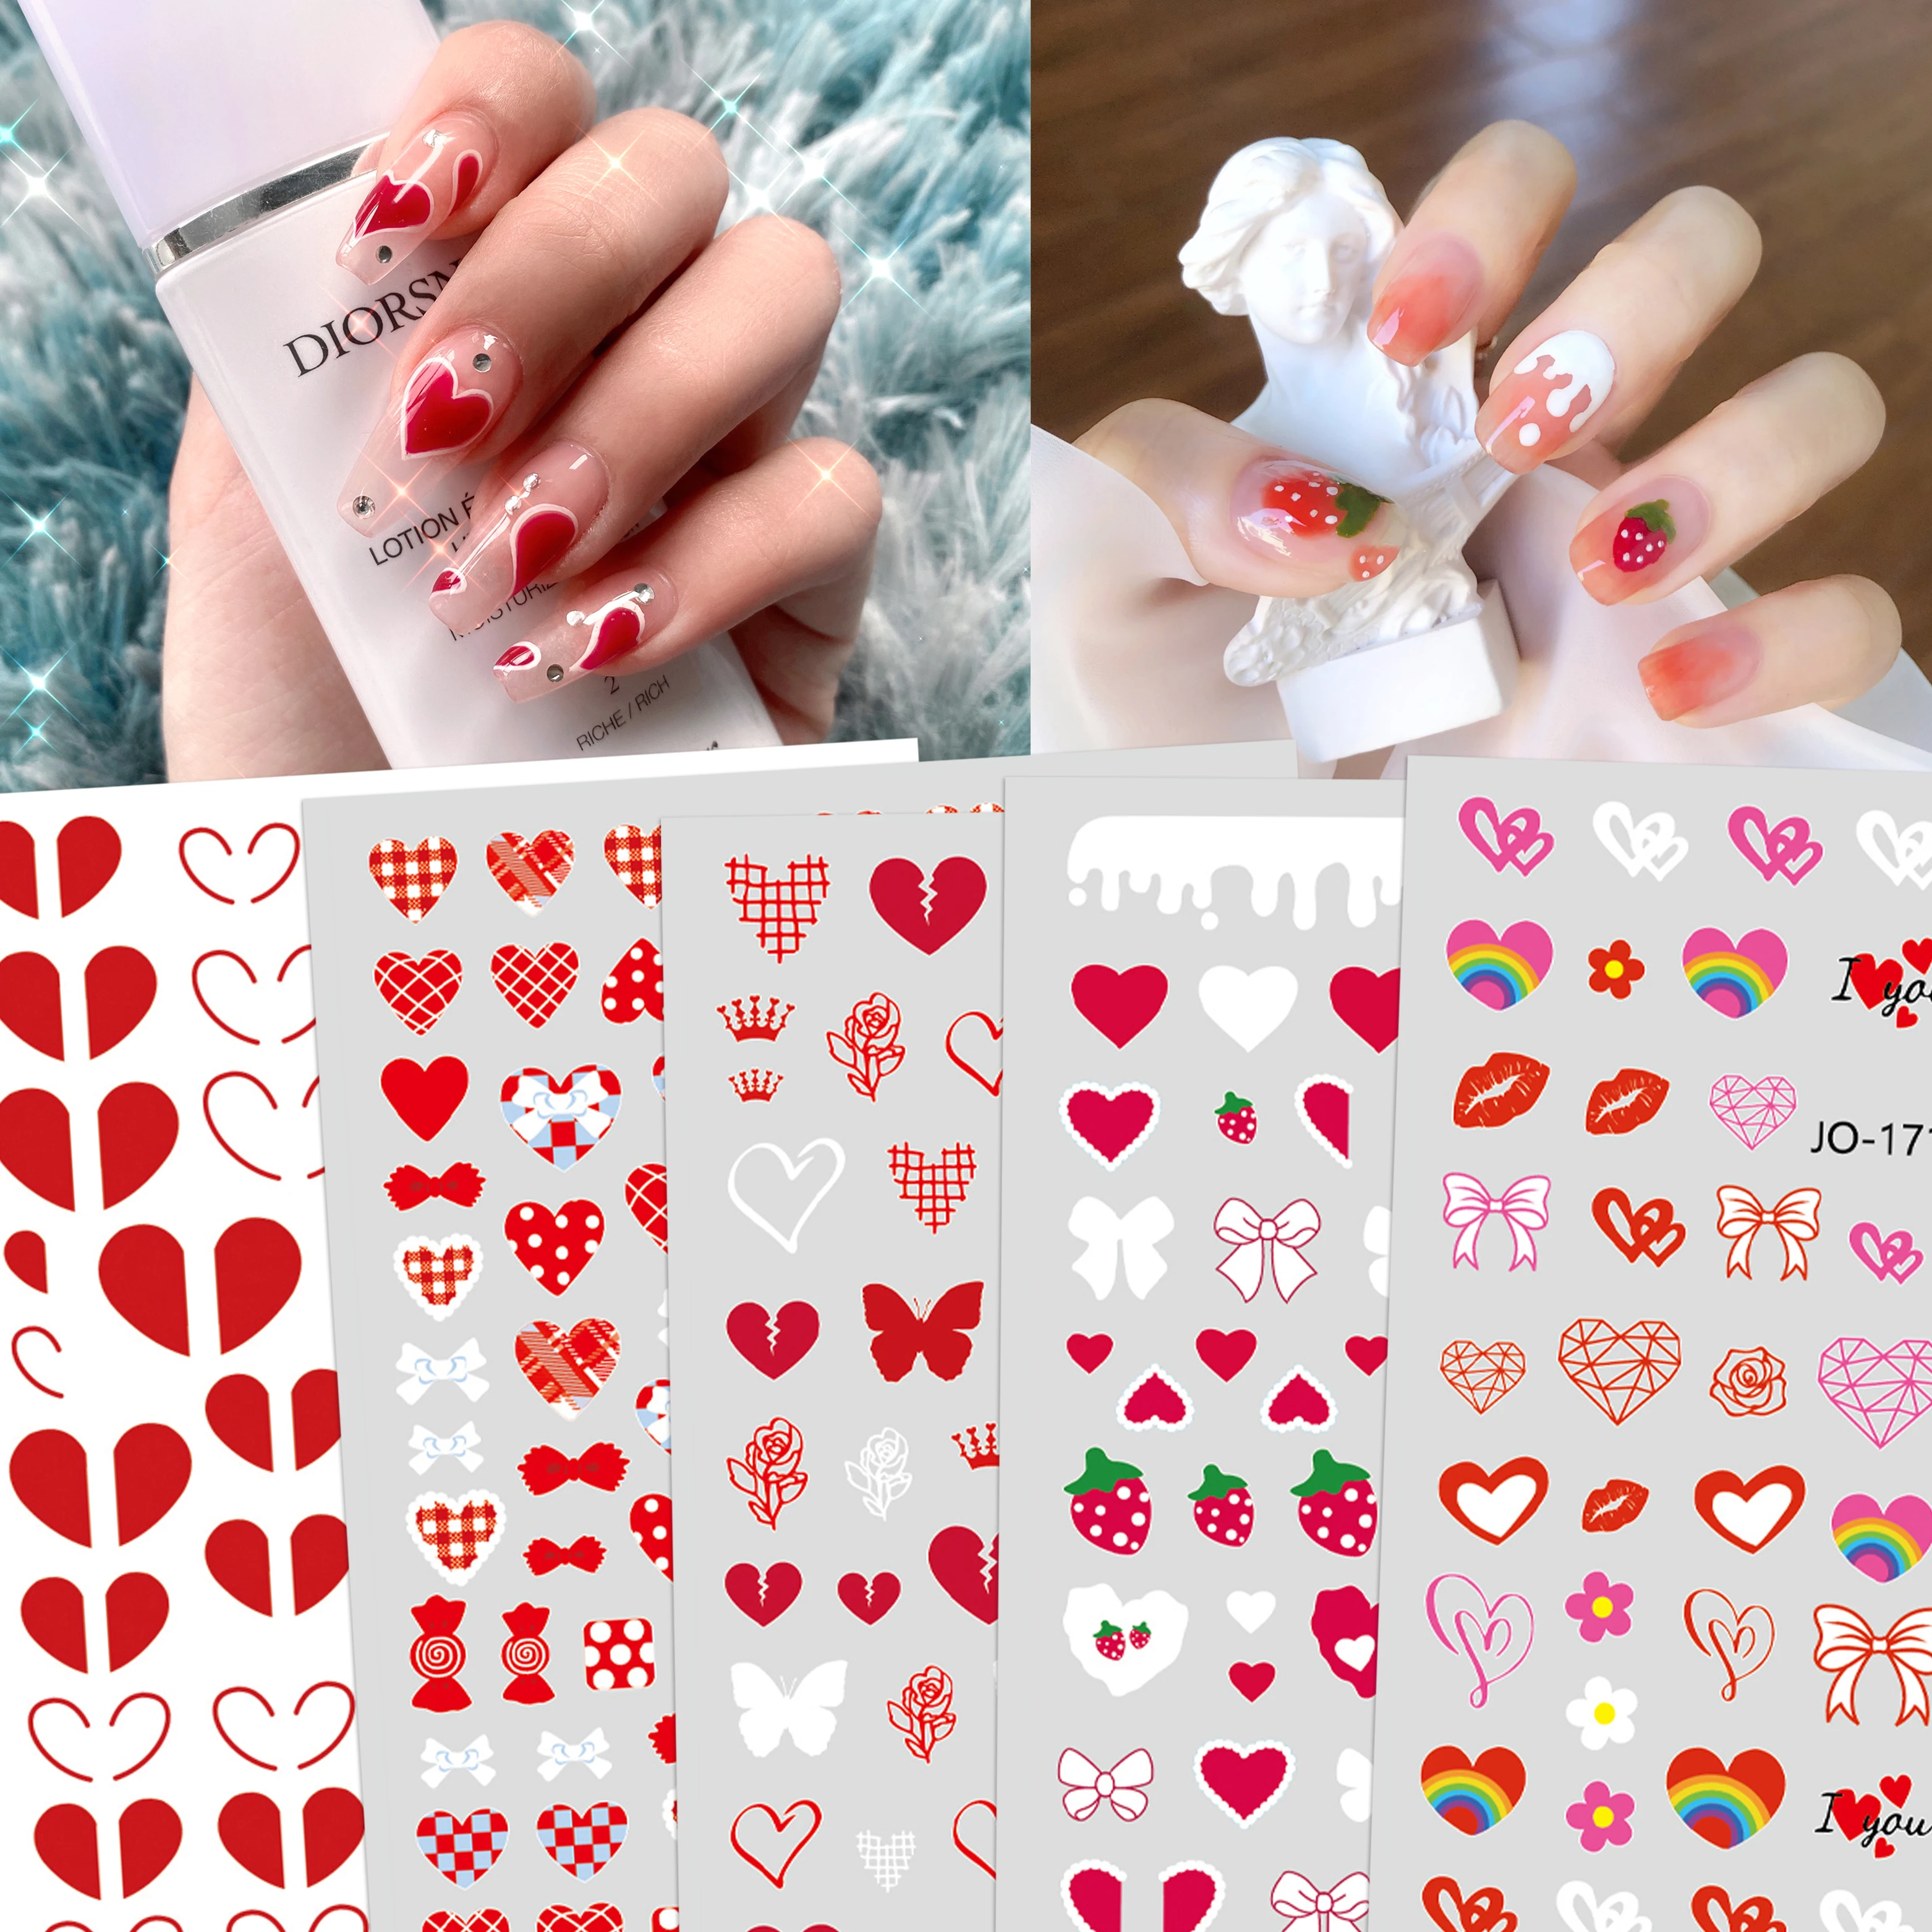 10PCS New Heart 3D Adhesive Nail Art Stickers Black Letters Decorative Stickers for Nails Sliders for Nails Disney Brand Style